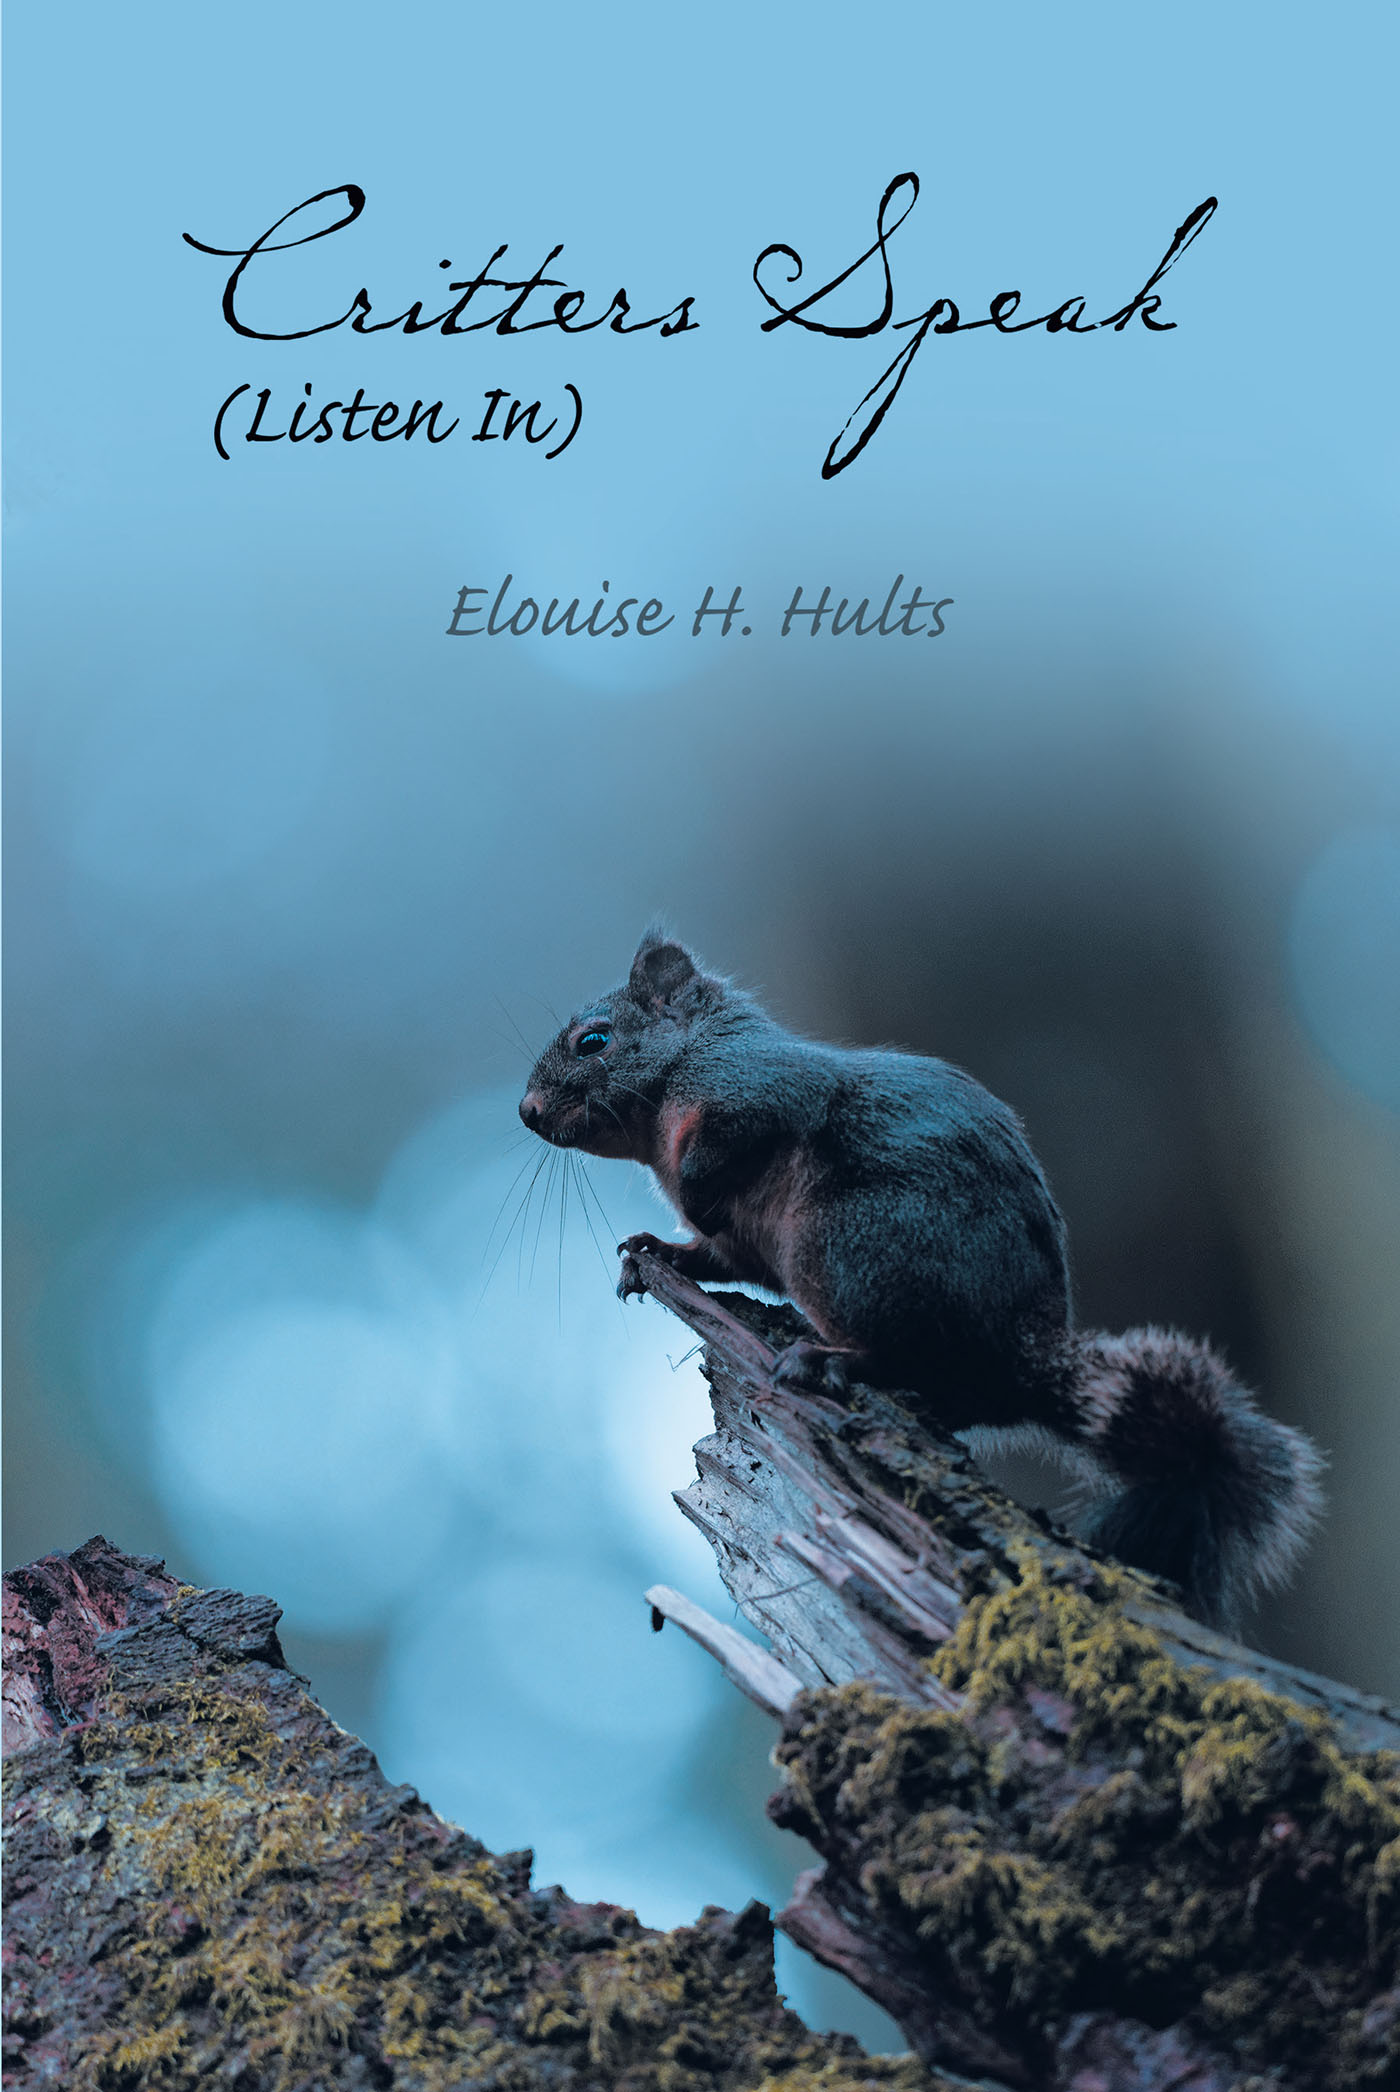 Elouise H. Hults’s Newly Released "Critters Speak (Listen In)" is a Lighthearted Reflection on the Lessons One Can Find While Observing Creation